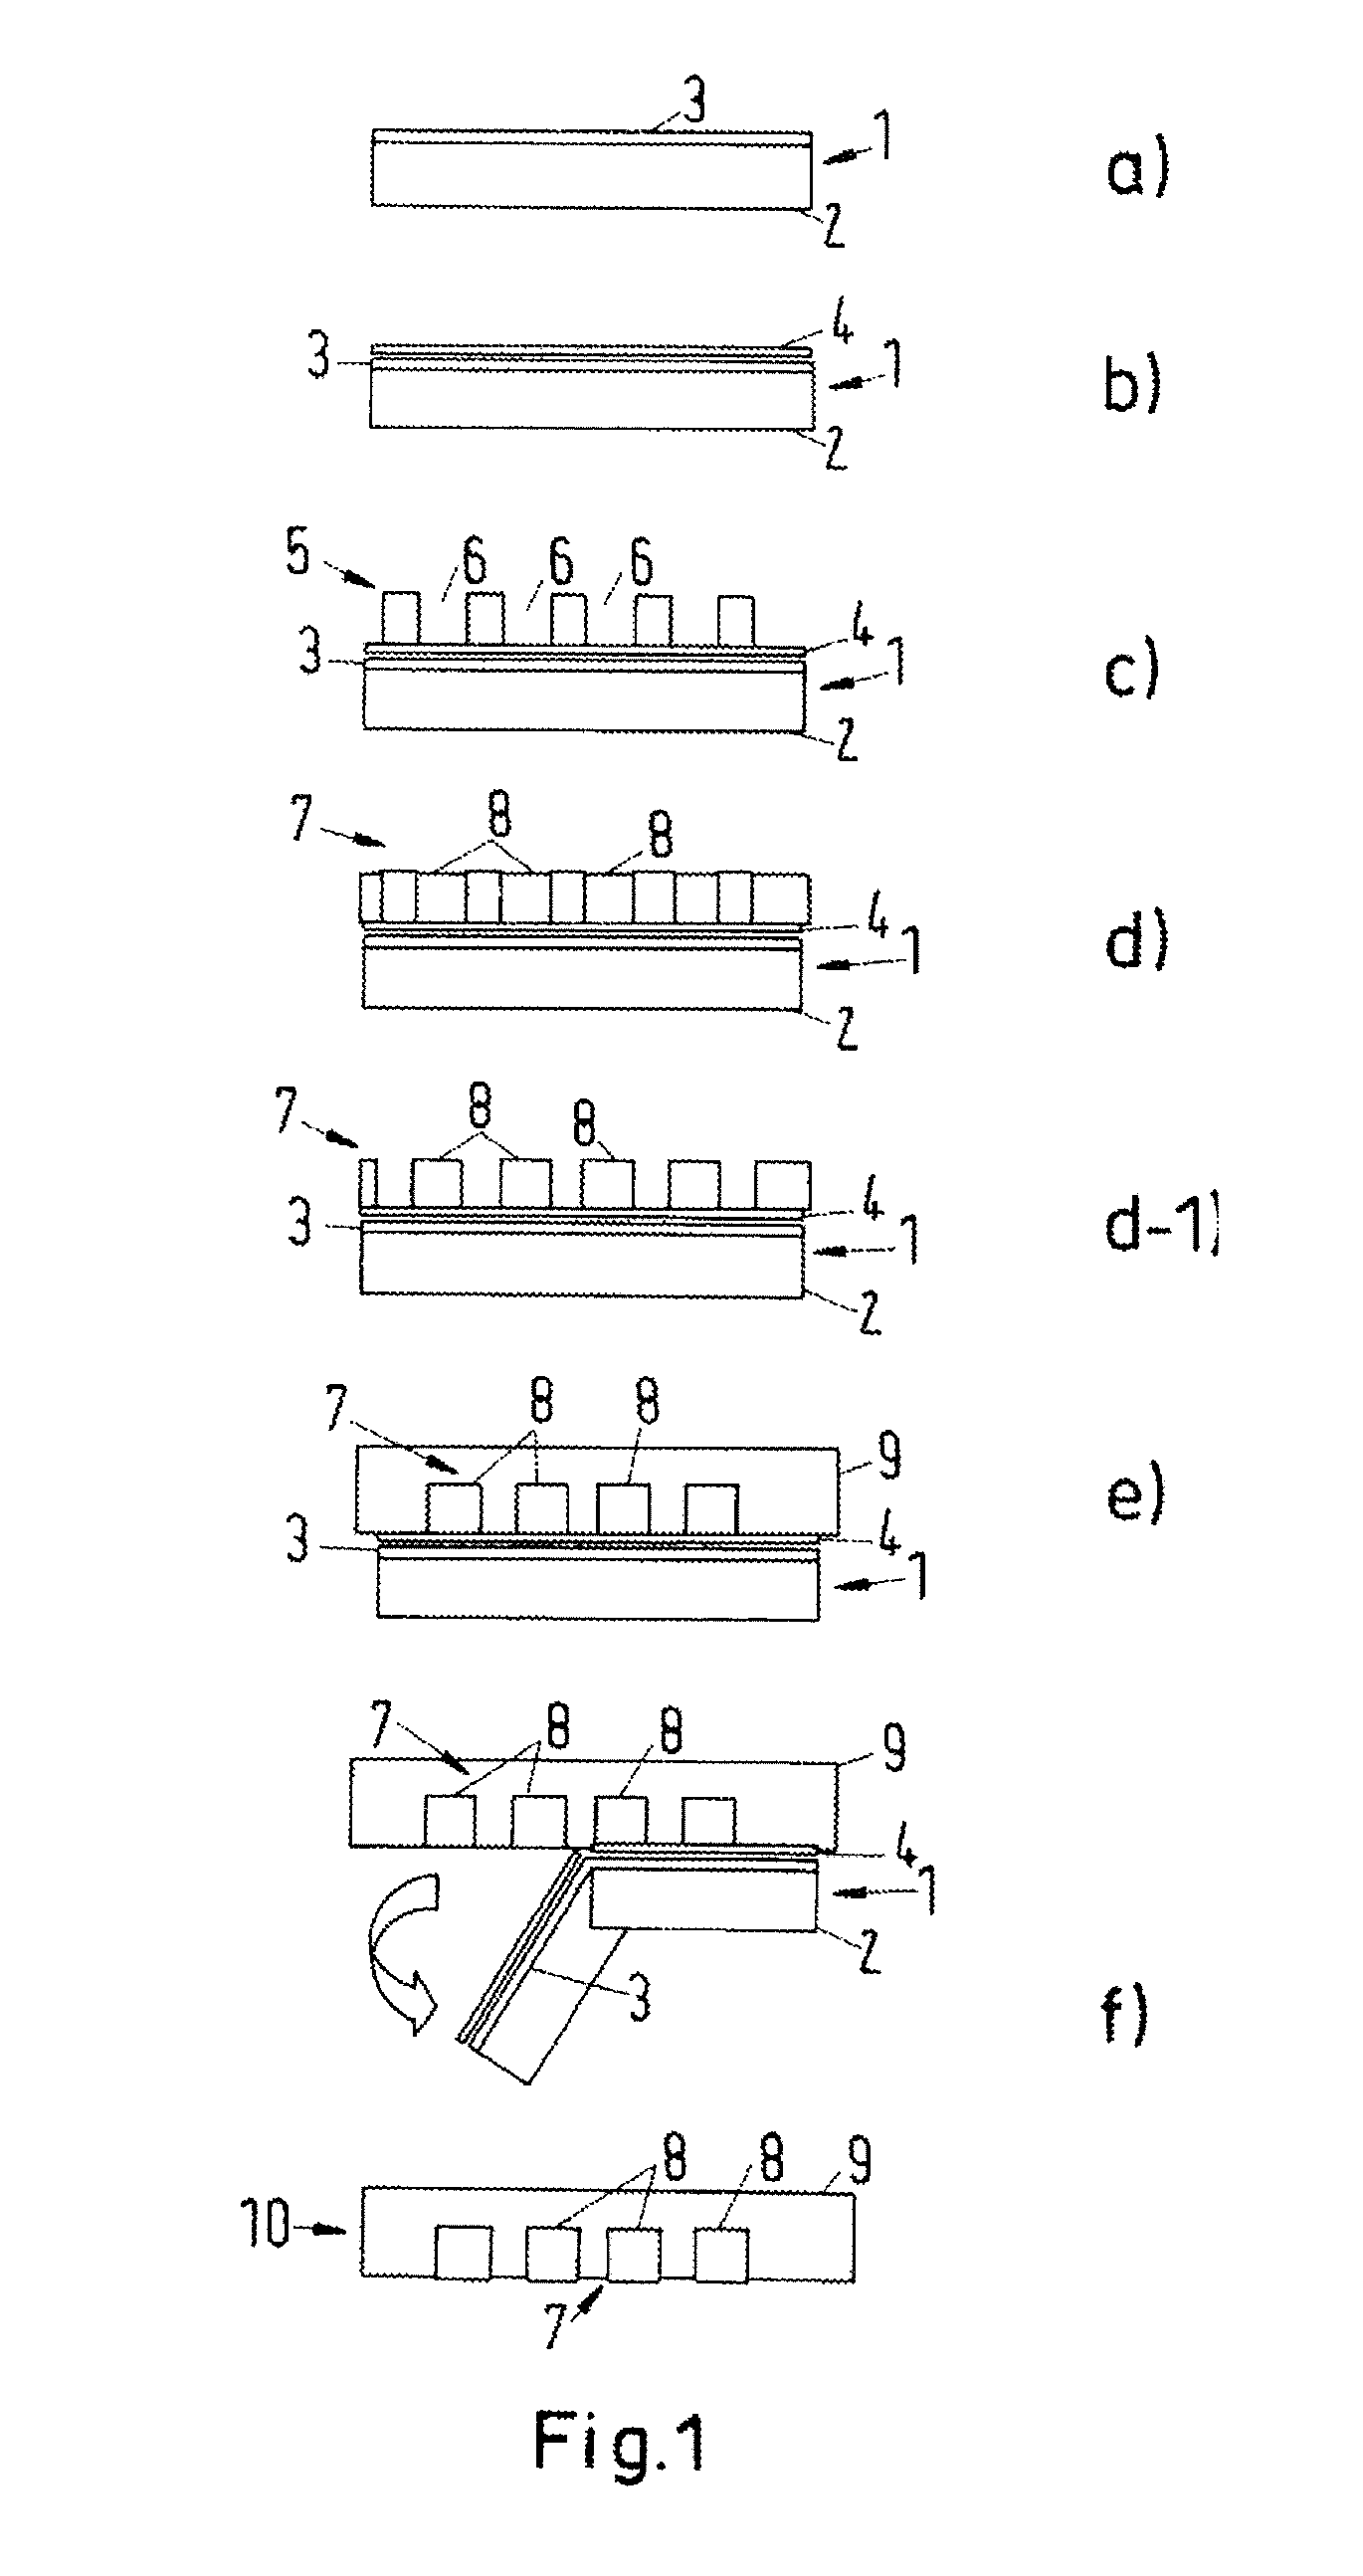 Method of Manufacturing a Circuit Carrier Layer and a Use of Said Method for Manufacturing a Circuit Carrier